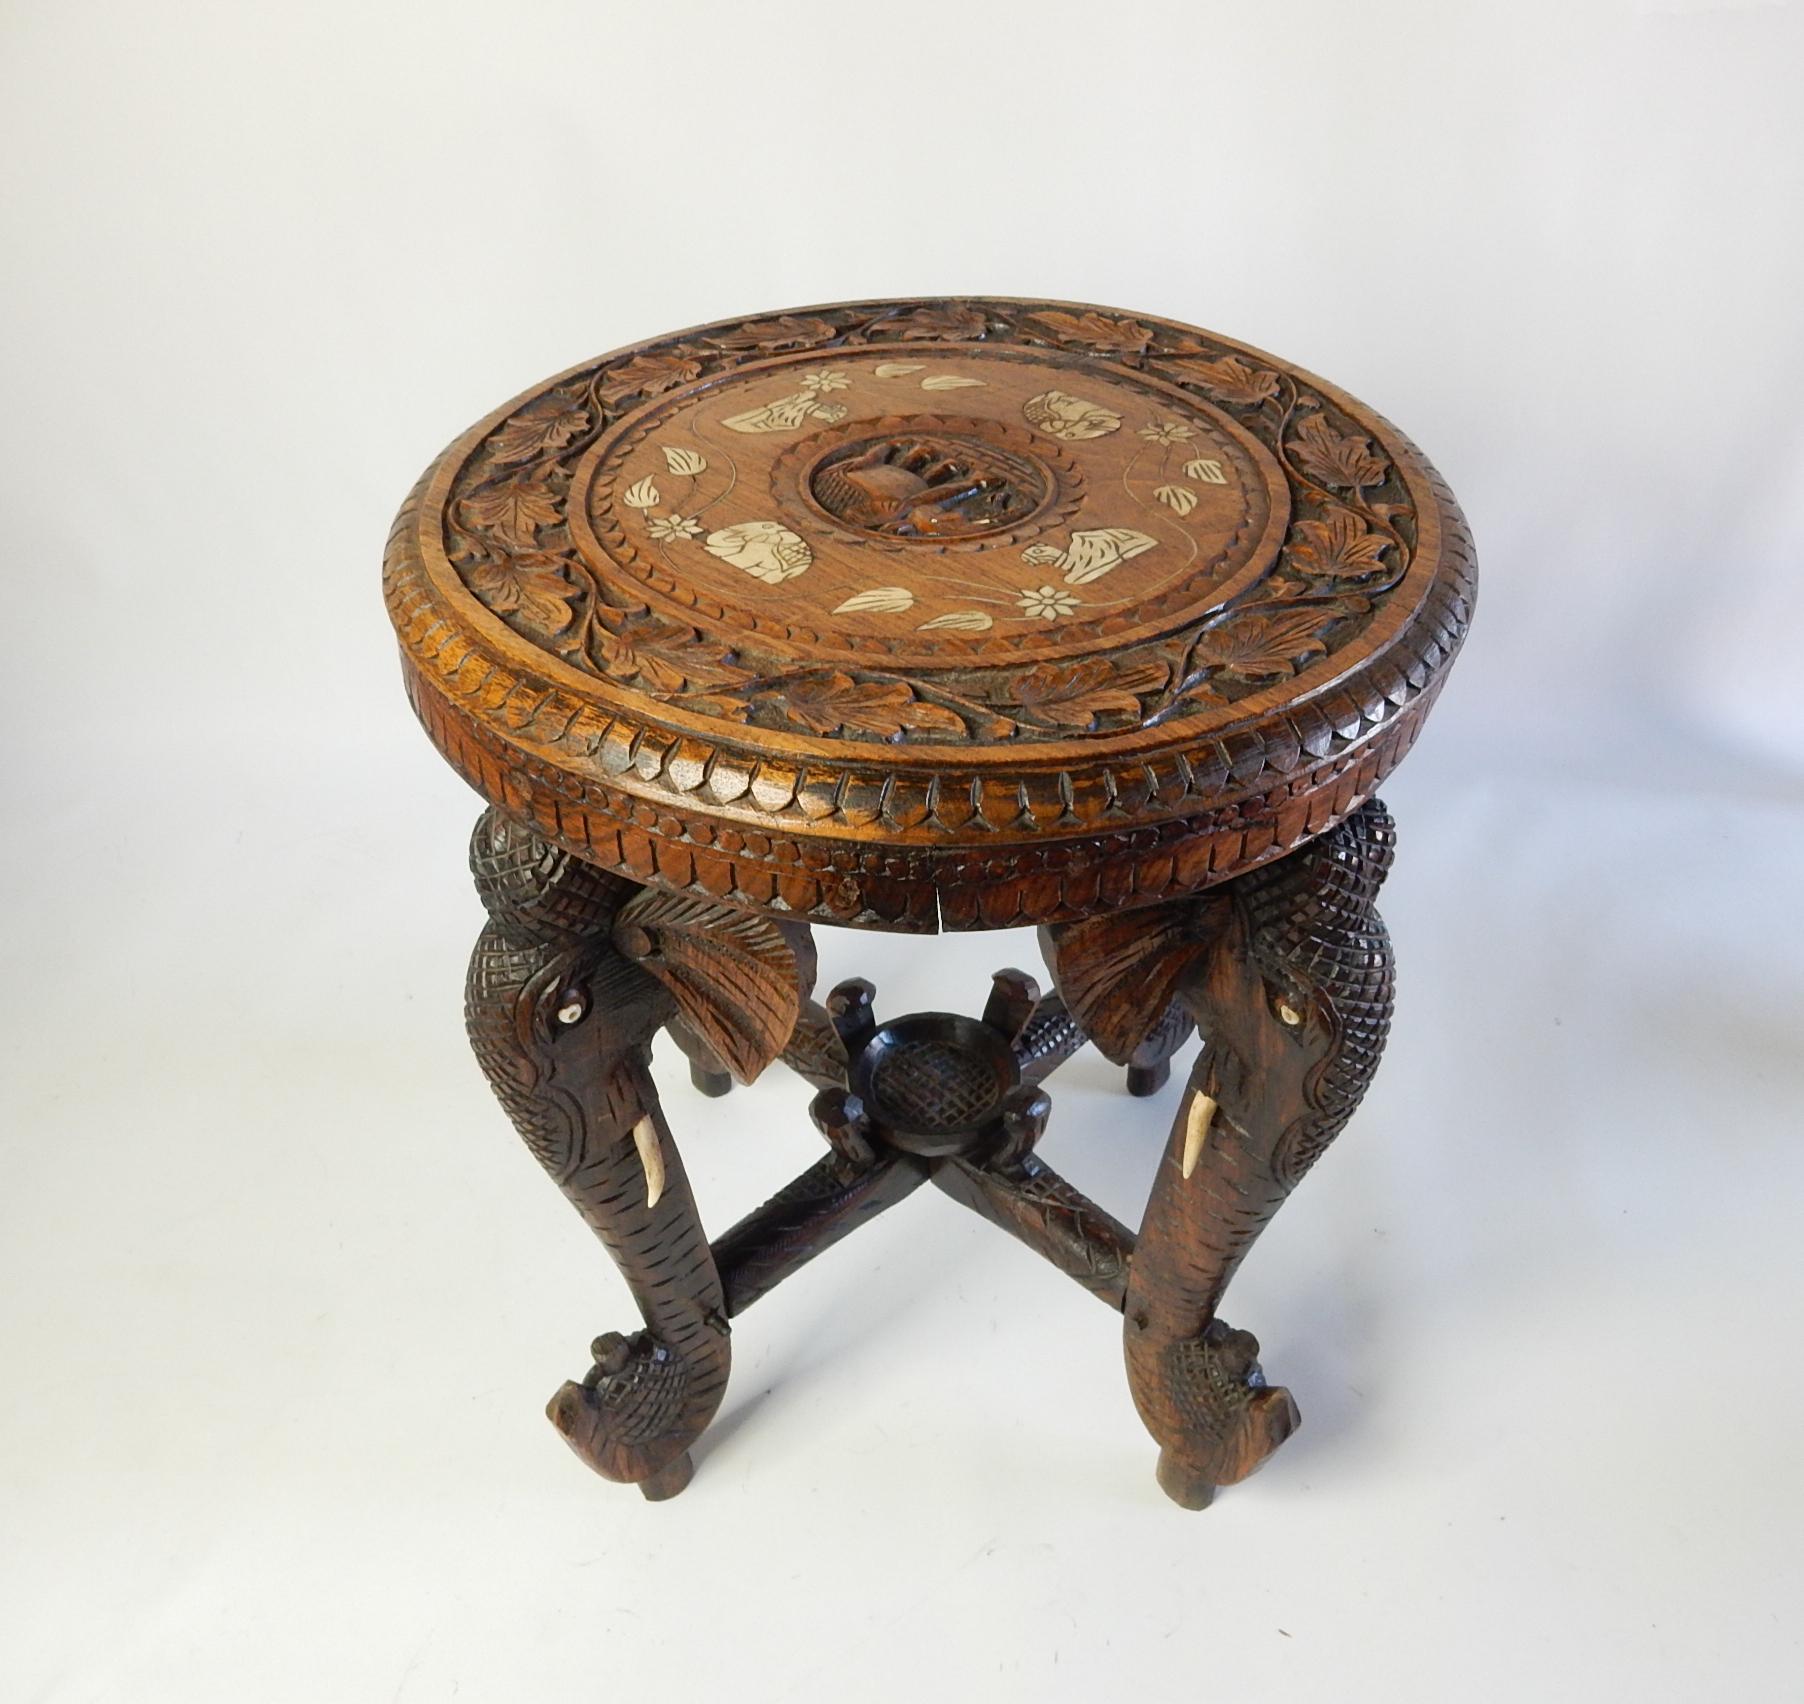 Antique 19th century Anglo-Indian Elephant leg side Gueridon/side table circa early 1900's. 
Heavily carved floral motif on top with bone inlay. Four carved elephant legs with hand carved bone tusks.
This table is in good solid antique condition